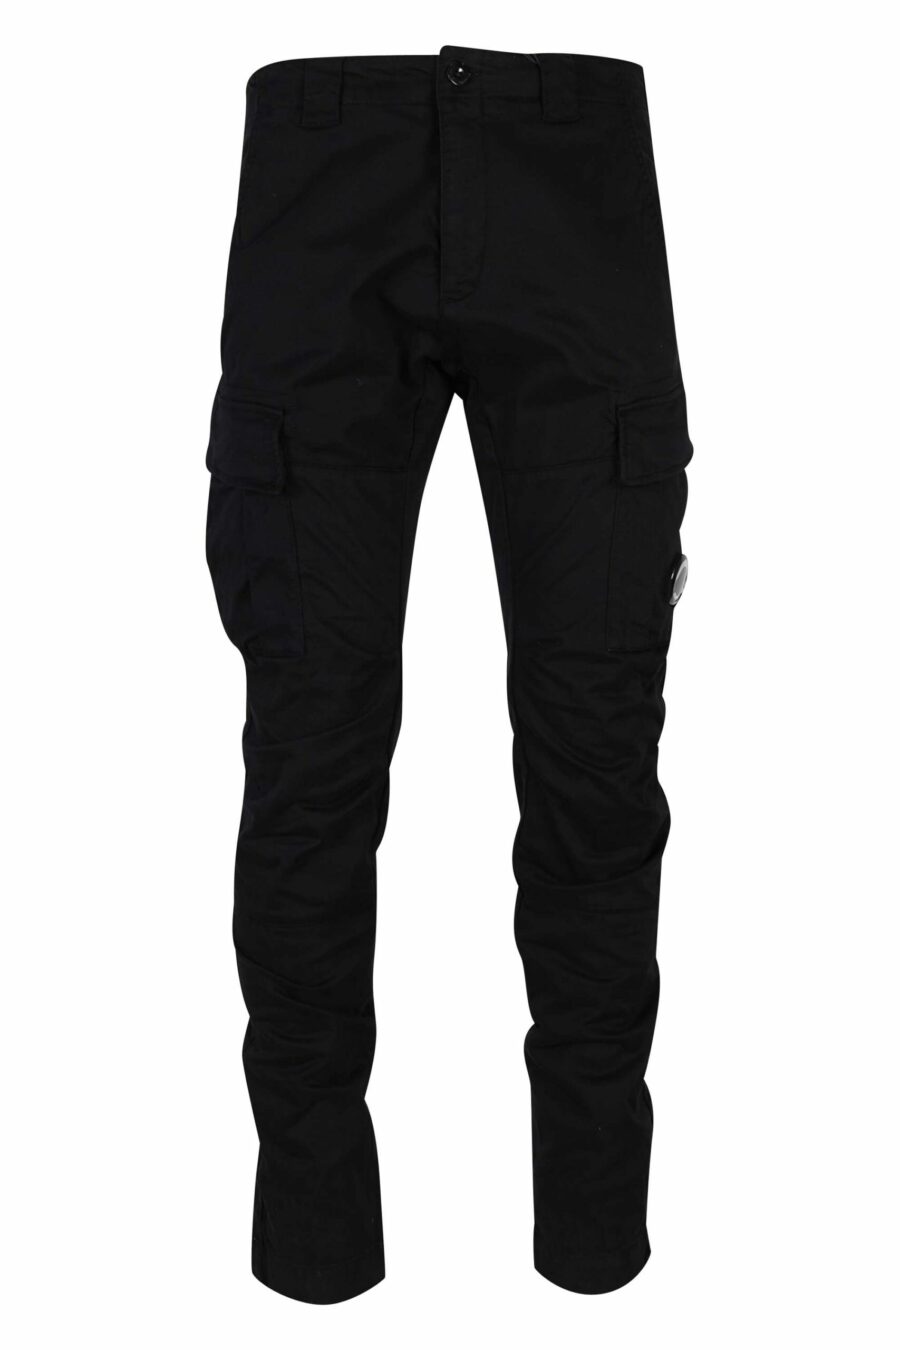 Black cargo trousers in stretch satin and logo lens - 7620943597585 1 scaled